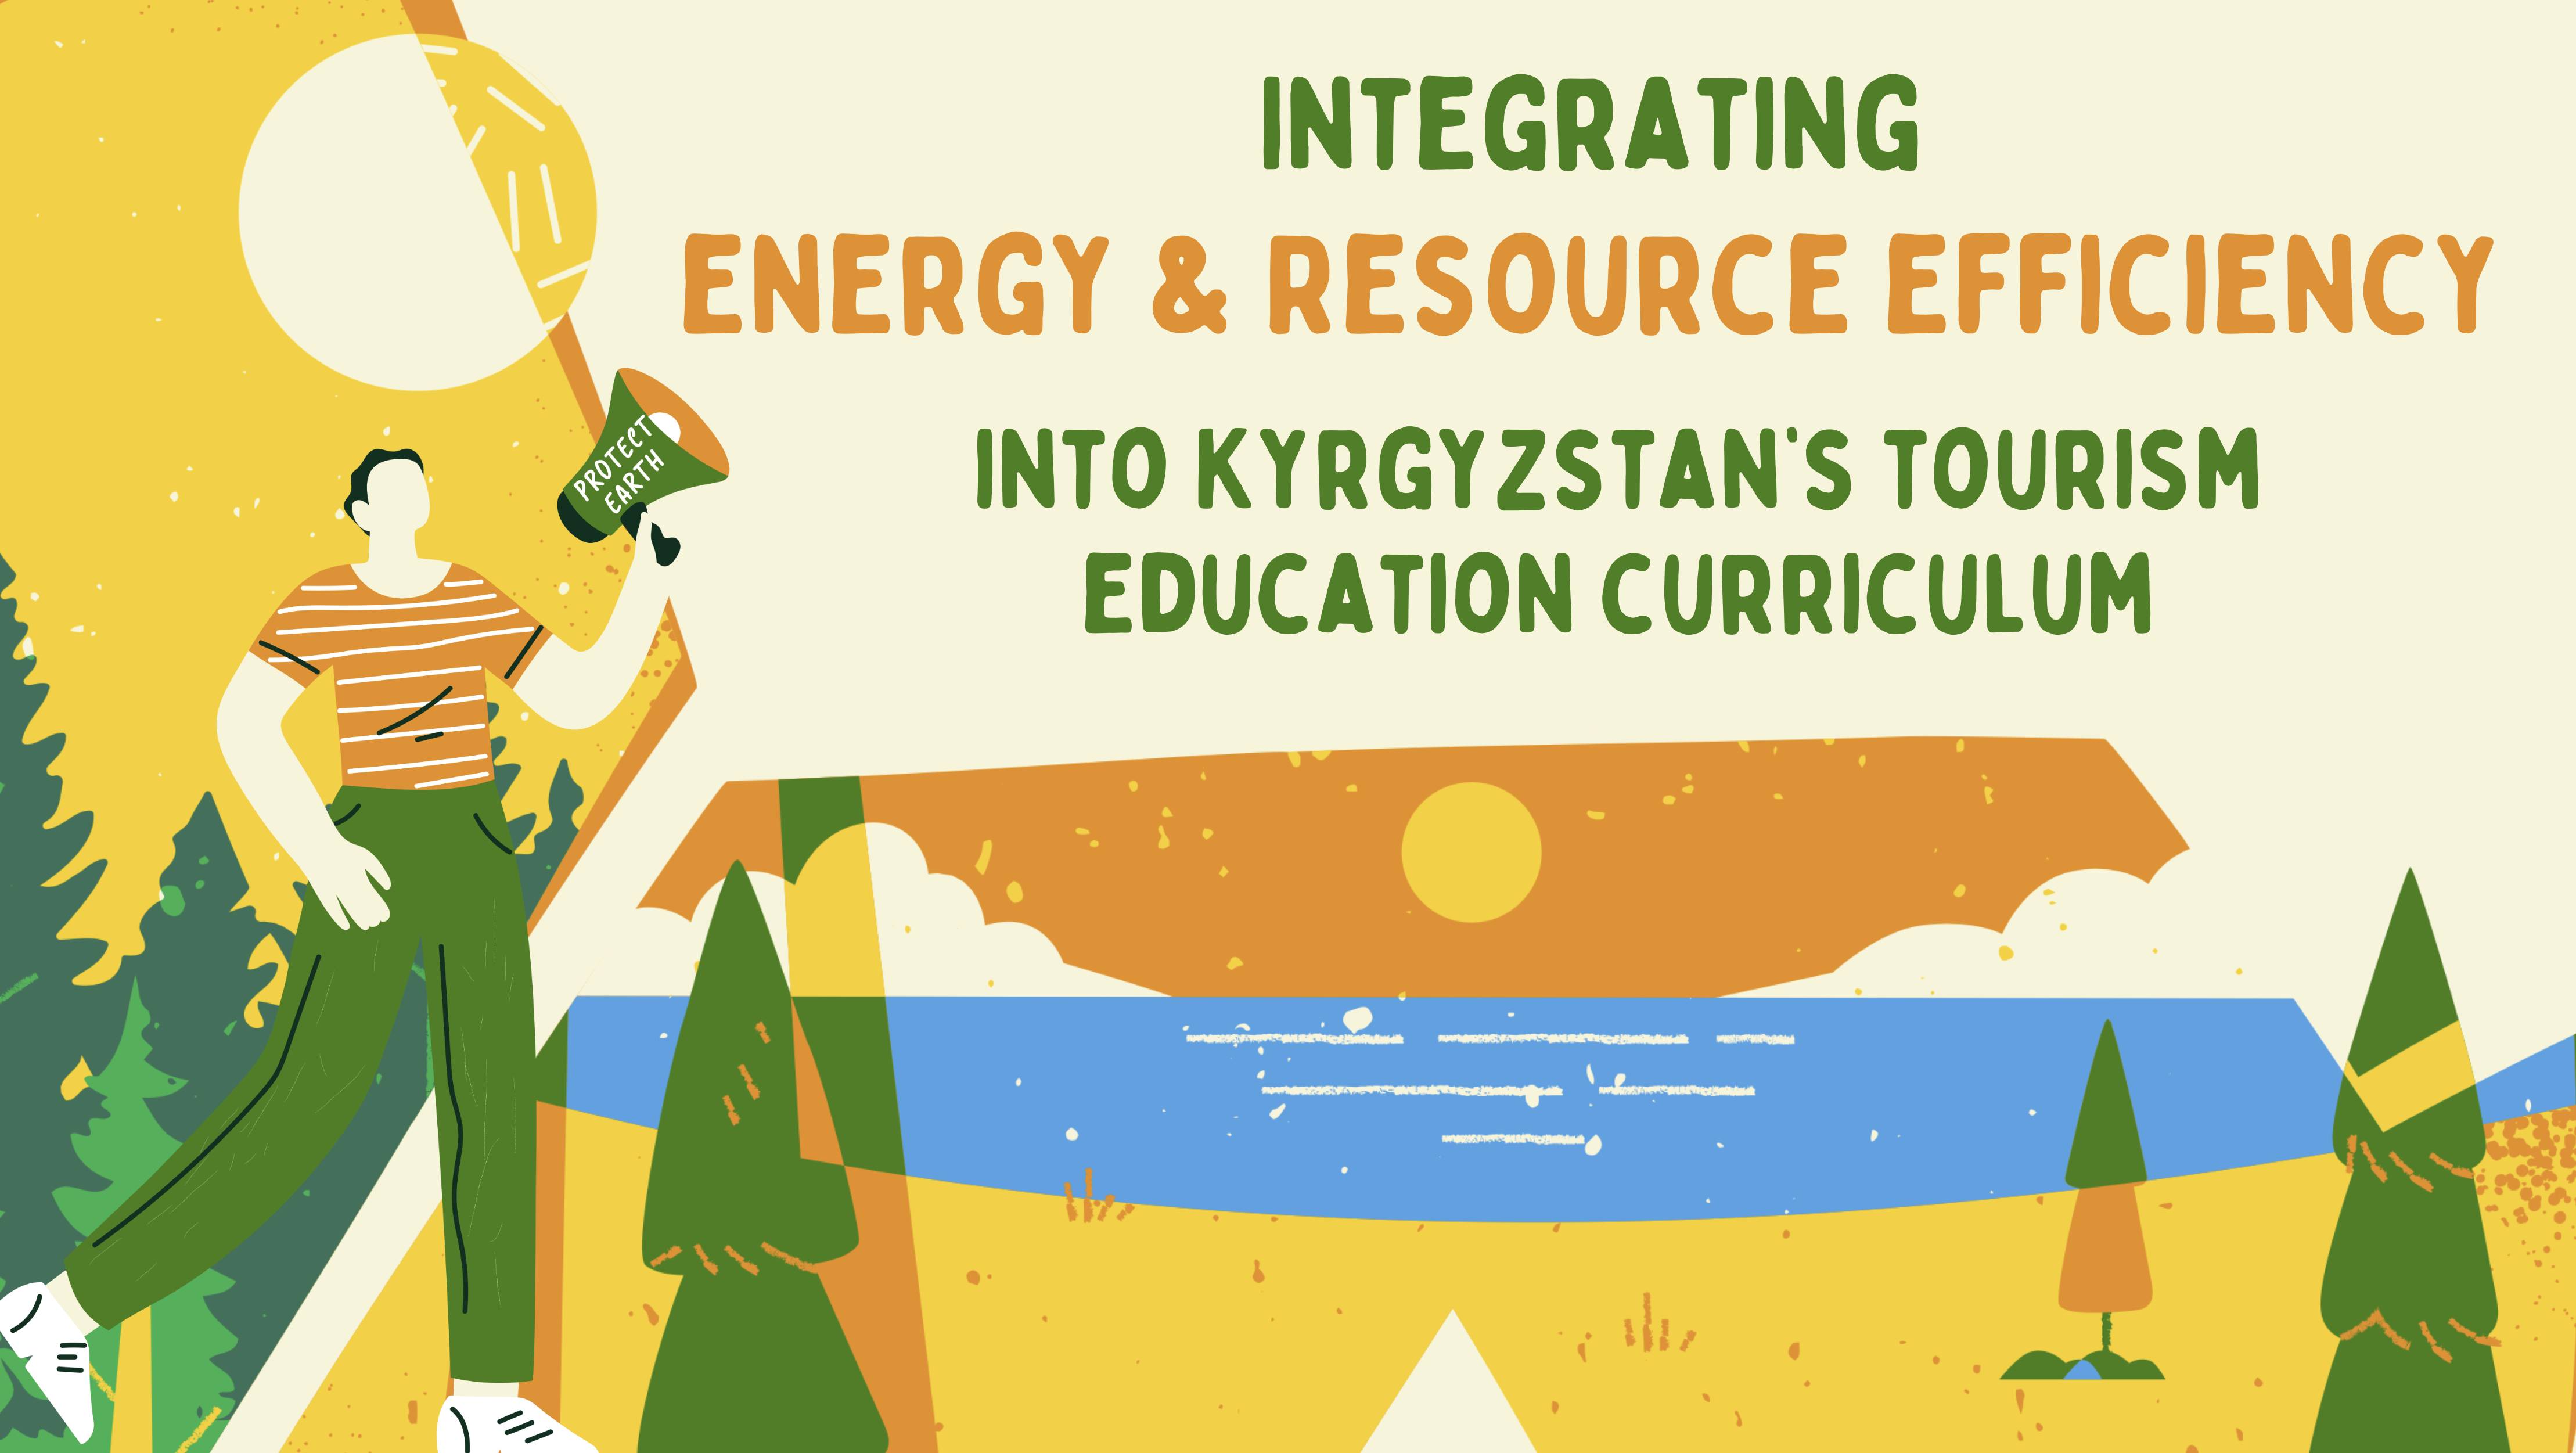 Integrating Energy and Resource Efficiency into Kyrgyzstan's Tourism Education Curriculum